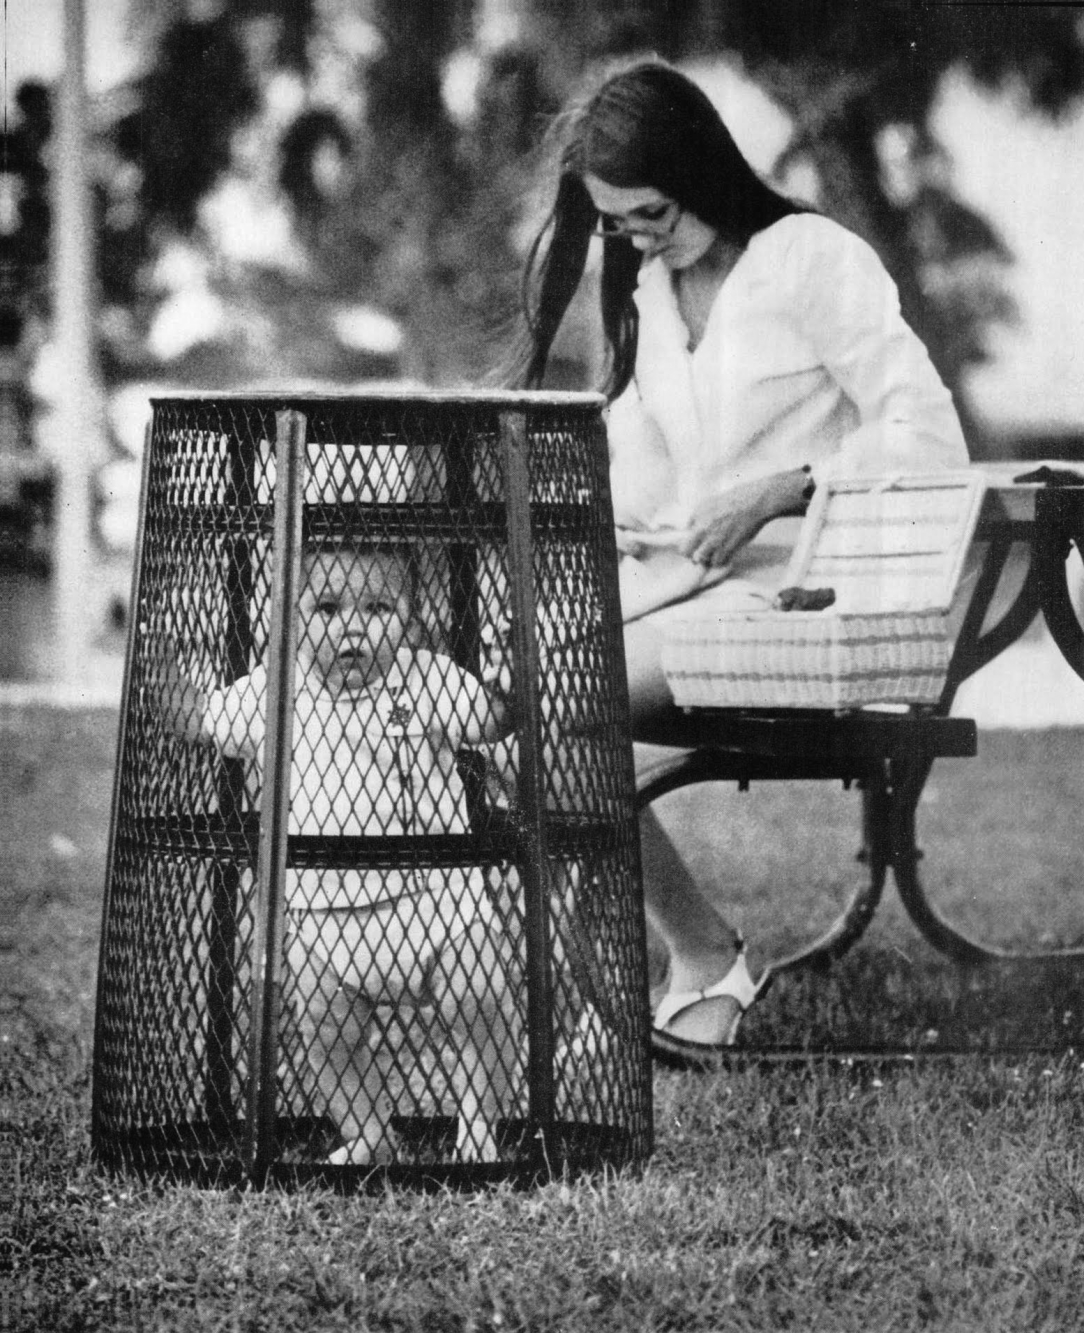 A mom uses a trash can to contain her baby while she crochets in the park, 1969